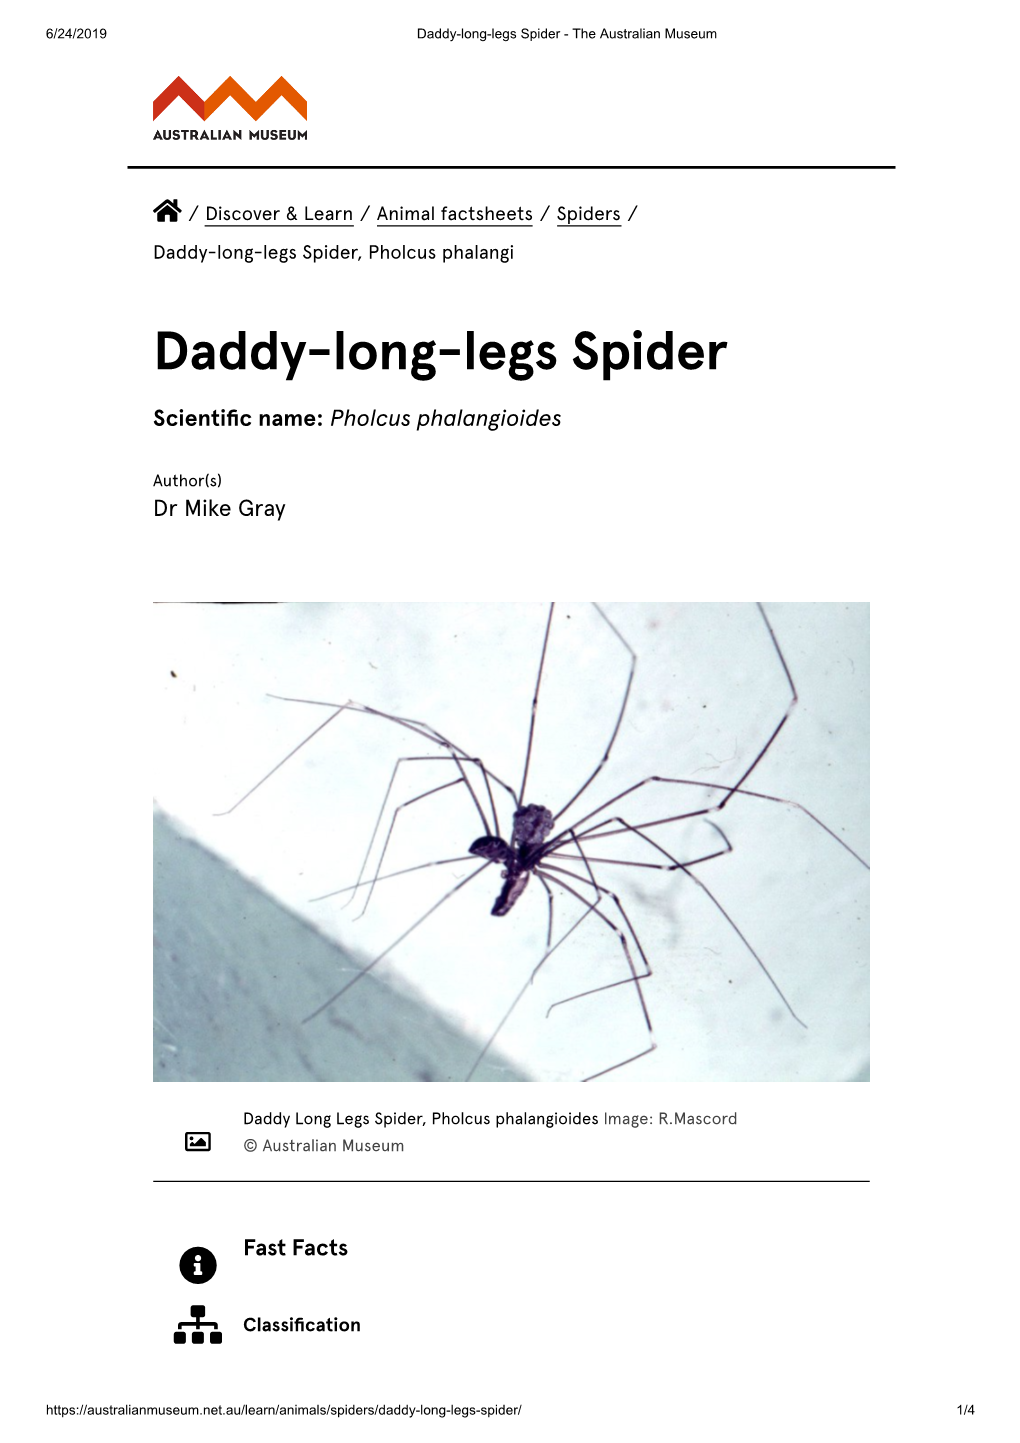 Daddy-Long-Legs Spider - the Australian Museum